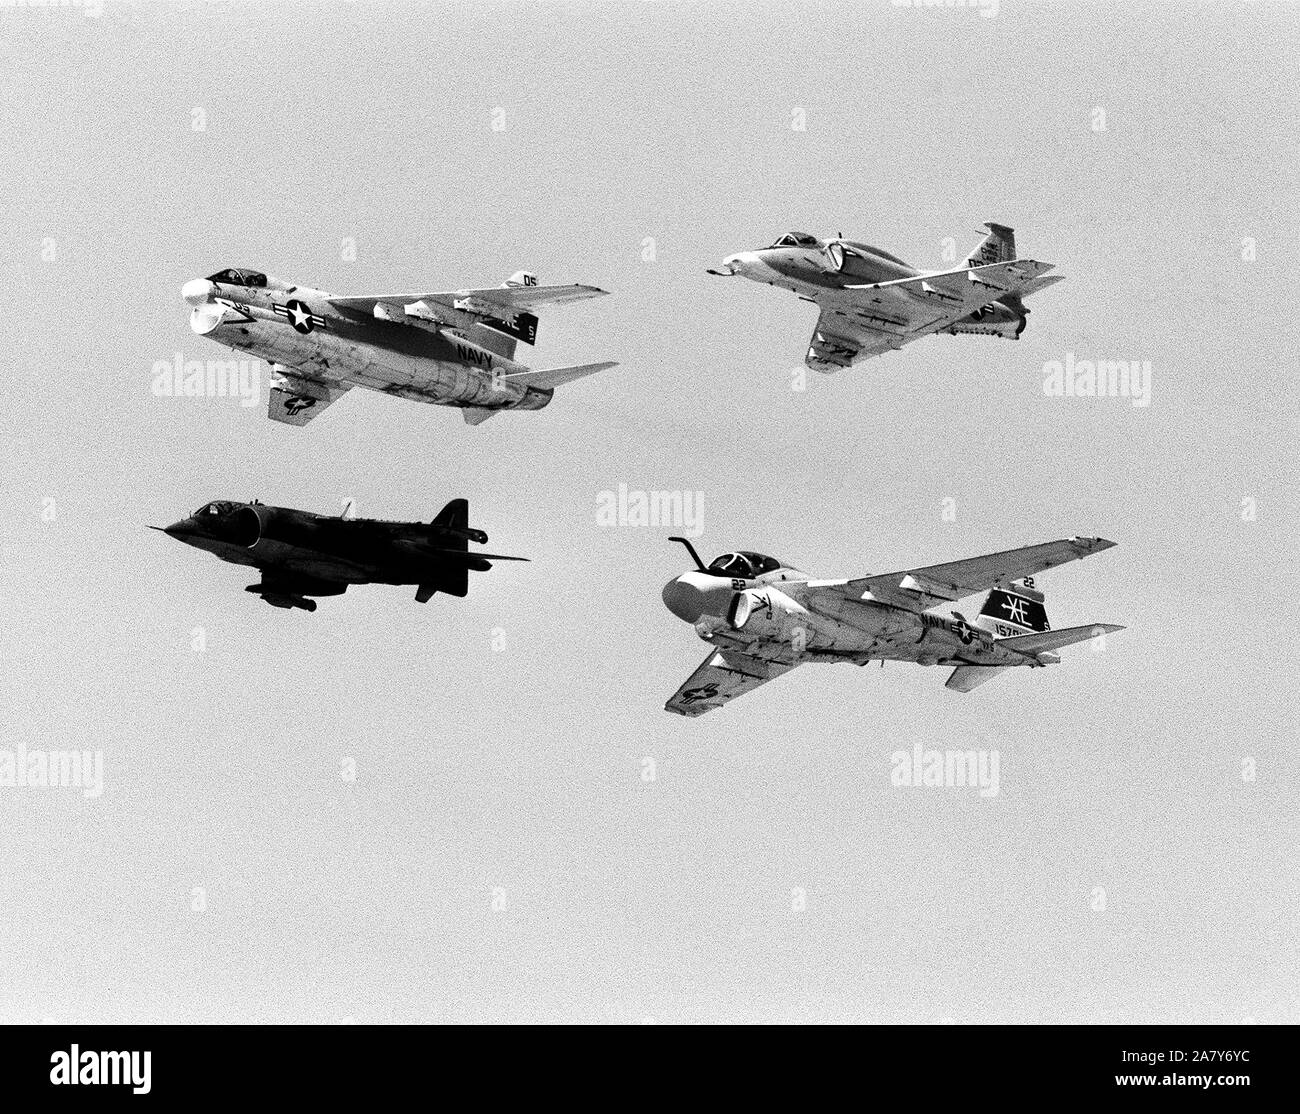 Ground-to-air view of four aircraft flying in formation during Test and Evaluation Squadron Five (VX-5) airshow.  The aircraft over Armitage Field, are (from left to right, clockwise) an A-7E Corsair II, an A-4M Skyhawk, and A-6E Intruder and an AV-8C Harrier. Stock Photo